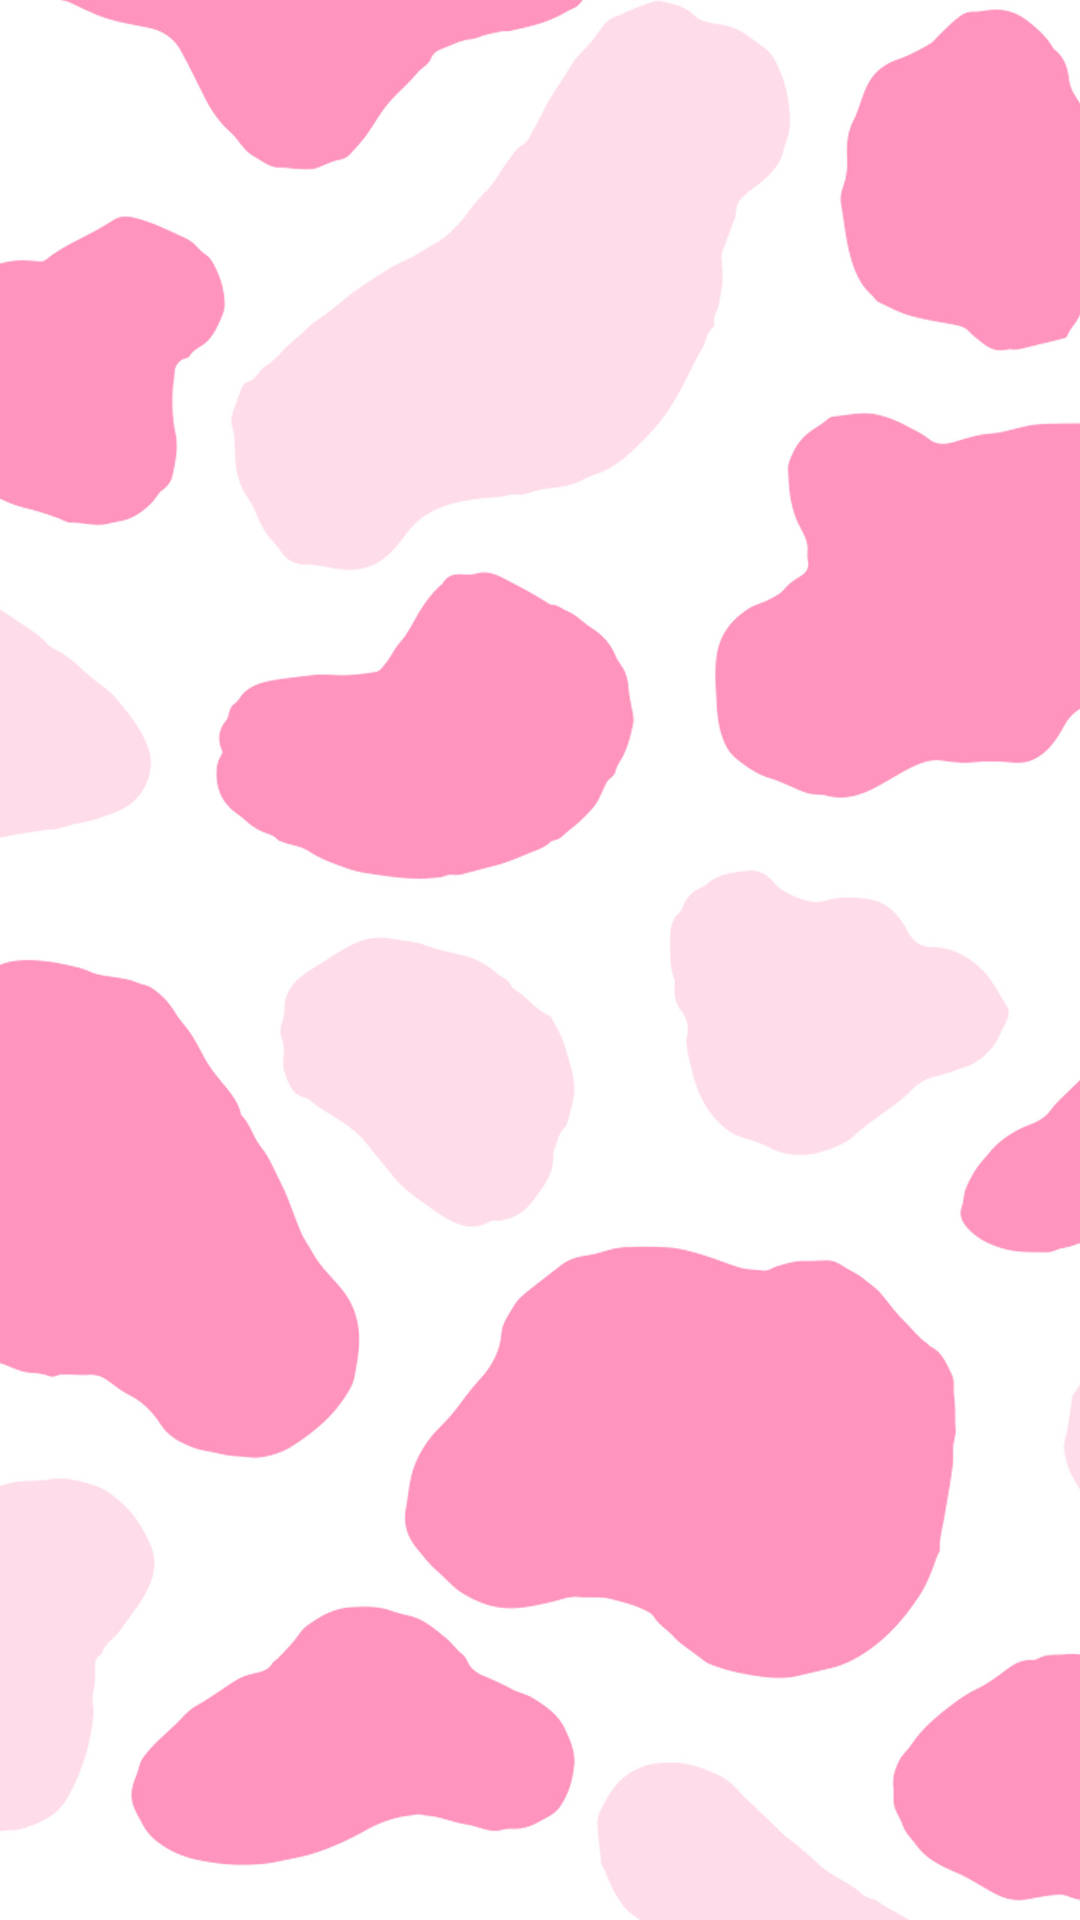 Download Cow Print Pink Shadow Wallpaper